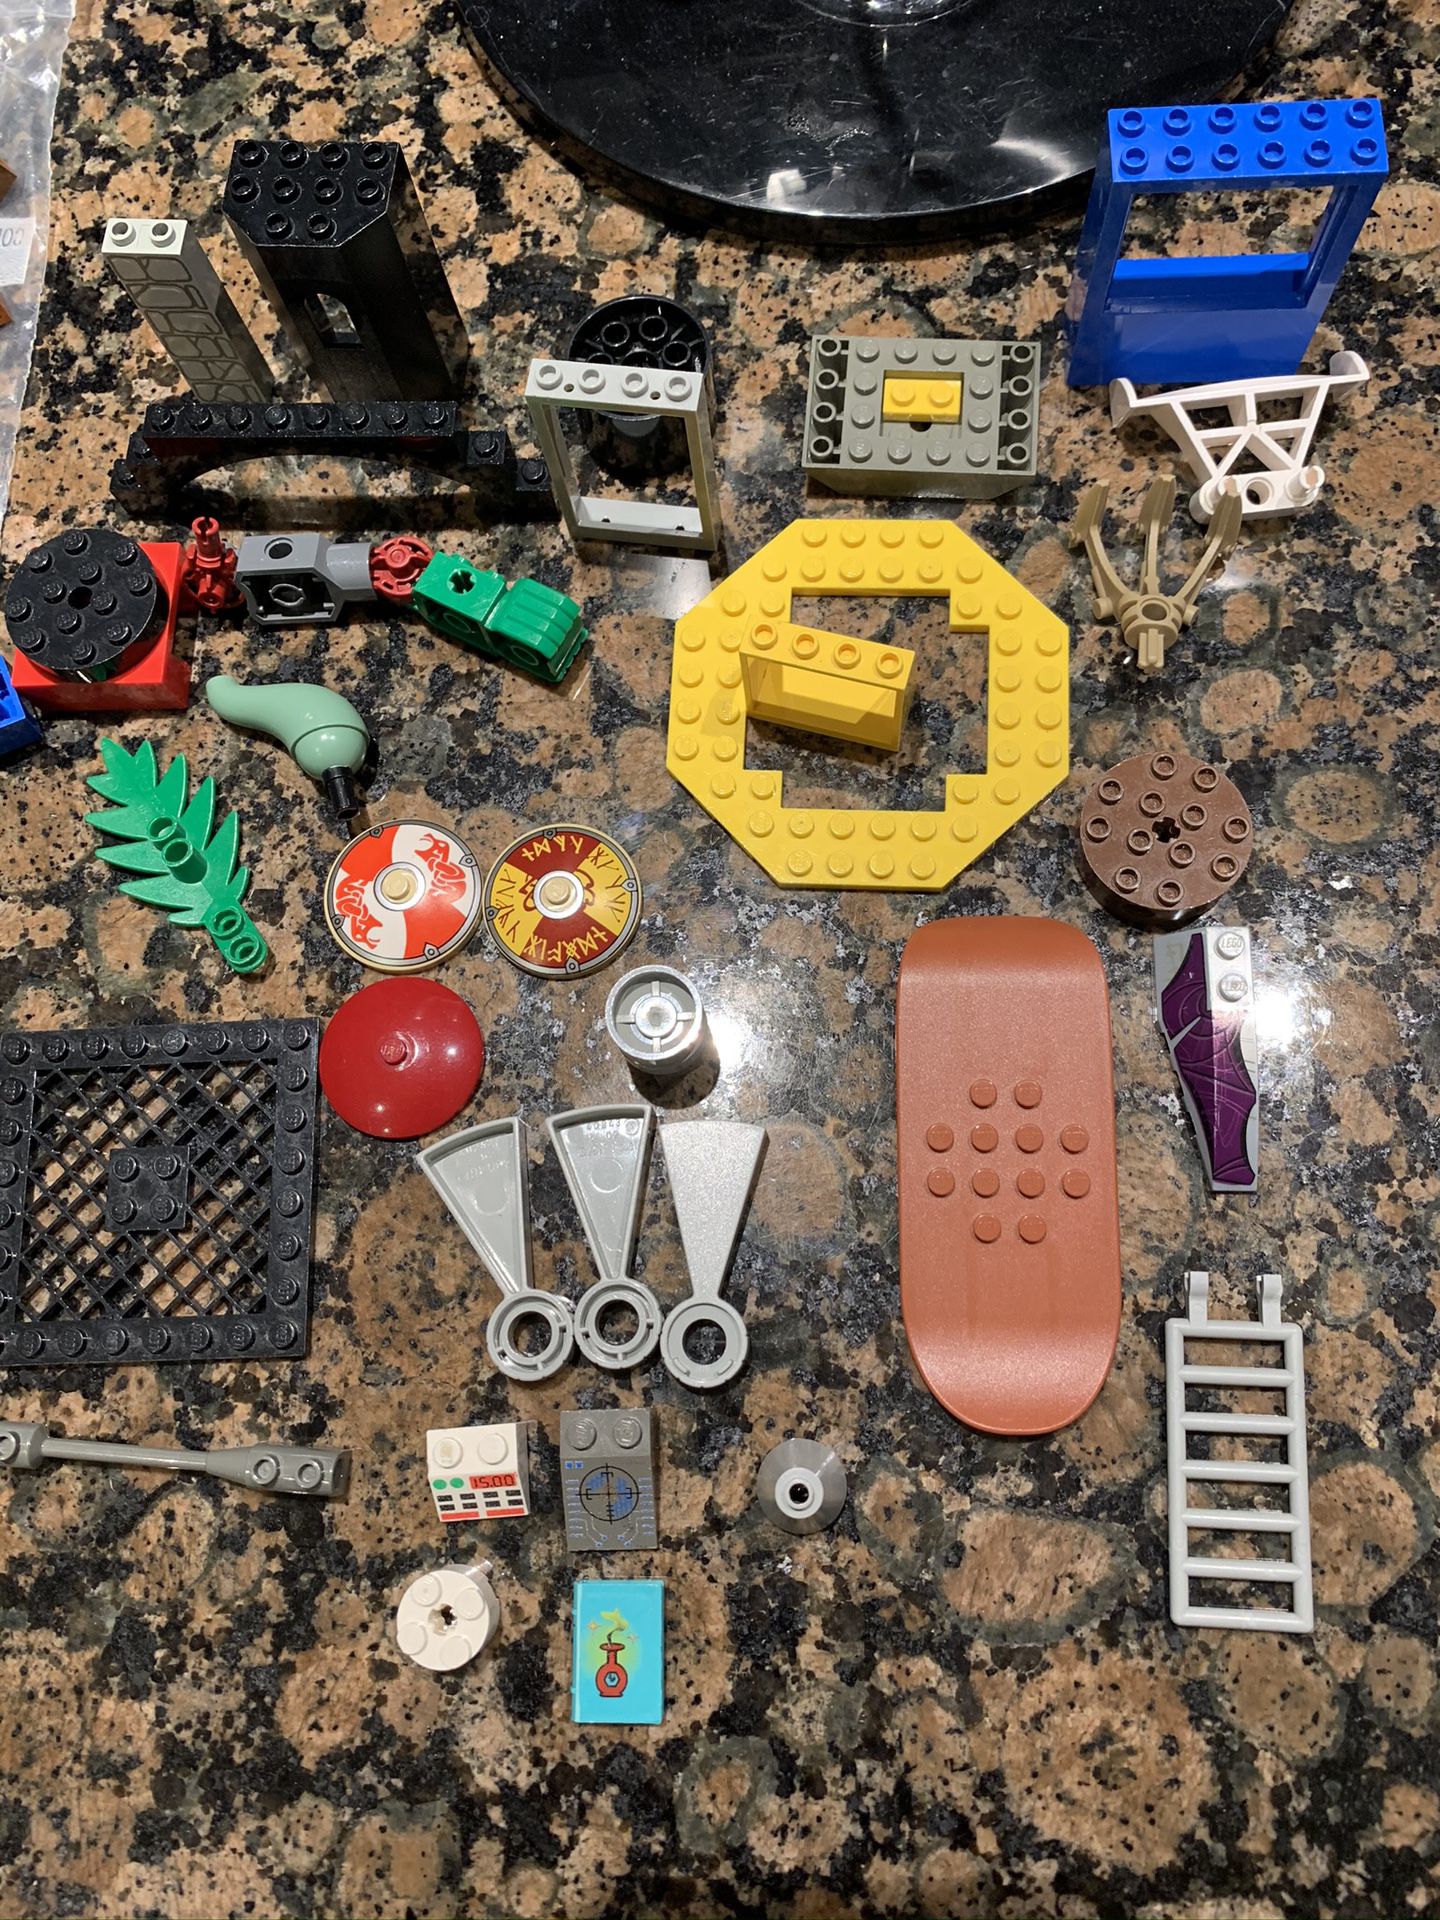 Two Pounds Lego Lot #19 Miscellaneous Lego Pieces (Authentic Lego, sorted and washed)